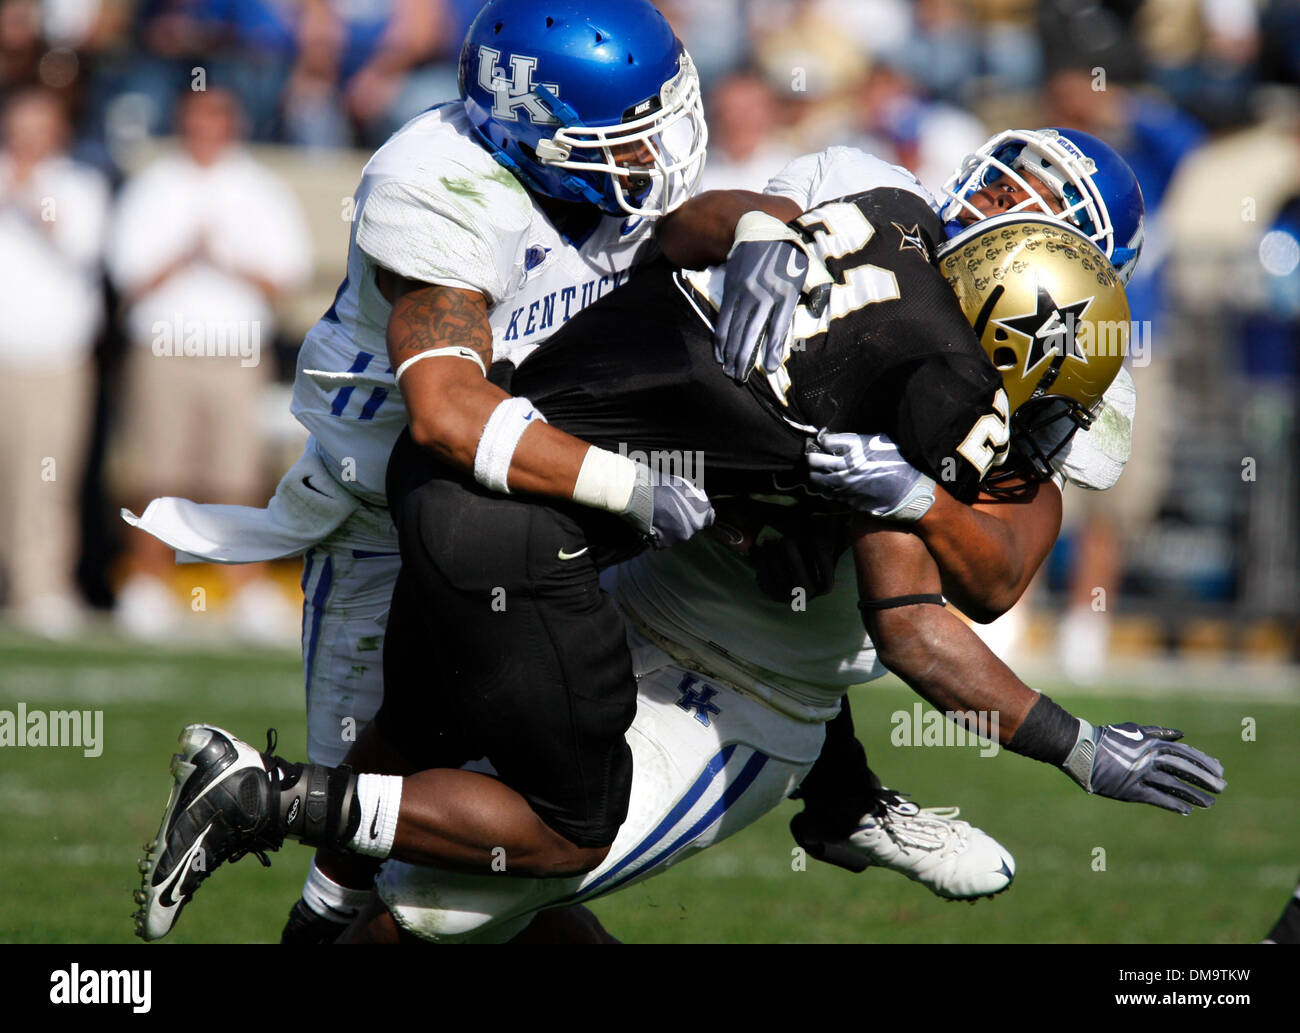 UK's Calvin Harrison,left, and Sam Maxwell brought down Vandy's Zac Stacy on third down, forcing a punt in the third quarter of the University of Kentucky vs. Vanderbilt football game  on Saturday, Nov. 14, 2009 in Nashville, Tennessee.   Photo by David Perry | Staff  (Credit Image: © Lexington Herald-Leader/ZUMApress.com) Stock Photo